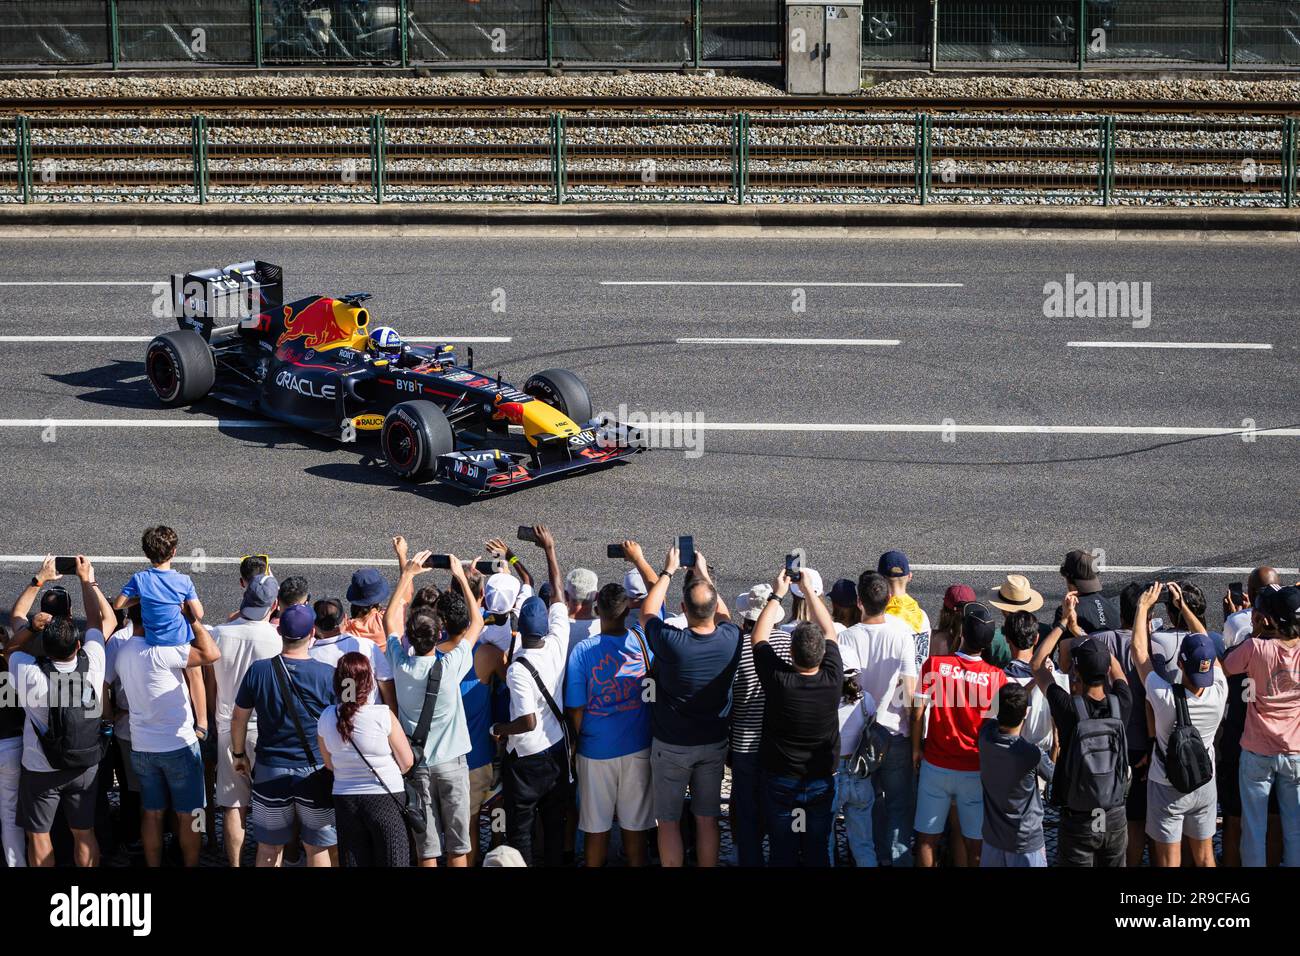 Lisbon, Portugal. 25th June, 2023. The British David Coulthard drives the formula 1 car - RB7 during the first edition of the Red Bull Showrun in Lisbon. Credit: SOPA Images Limited/Alamy Live News Stock Photo